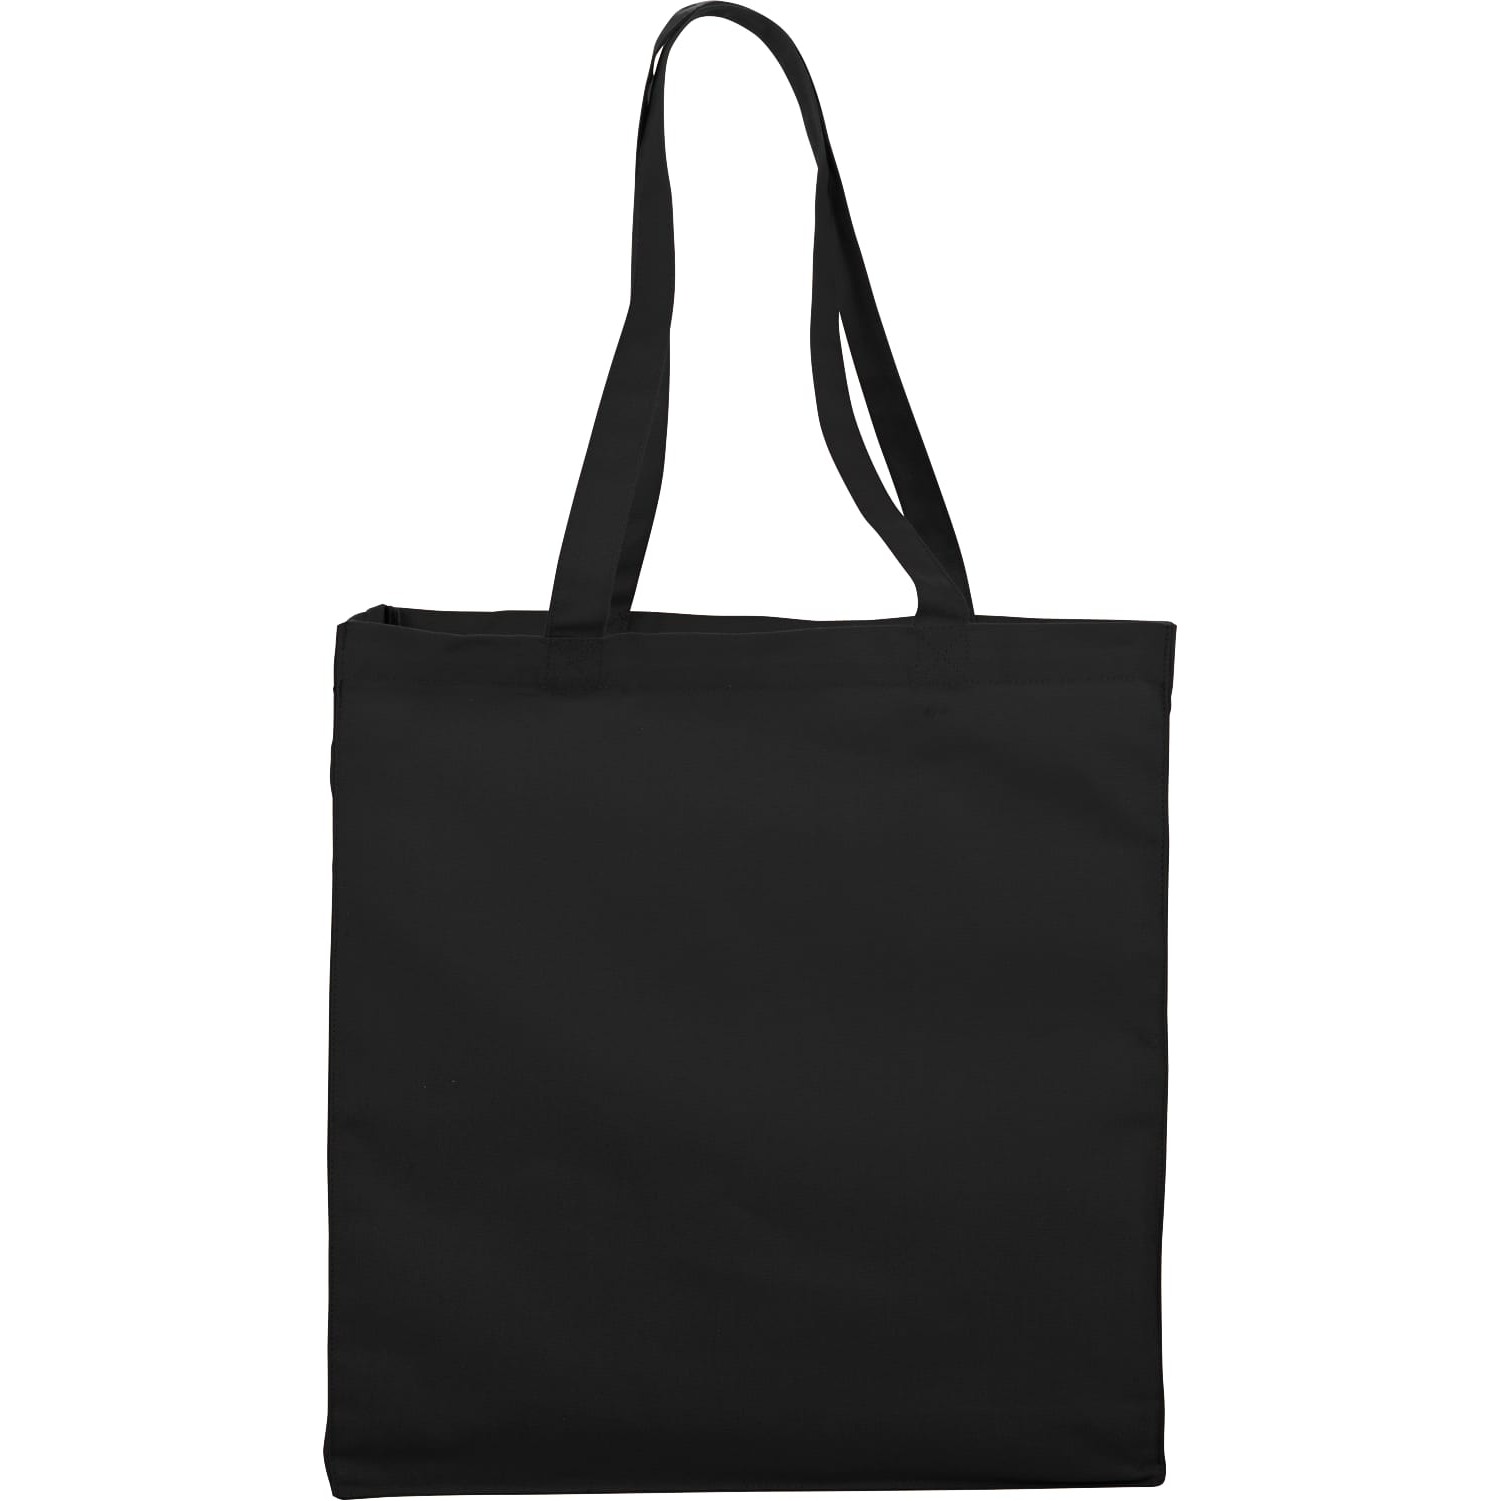 Custom Recyclable Cheap Printed Shopping Bags Wholesale (TP-SP057)